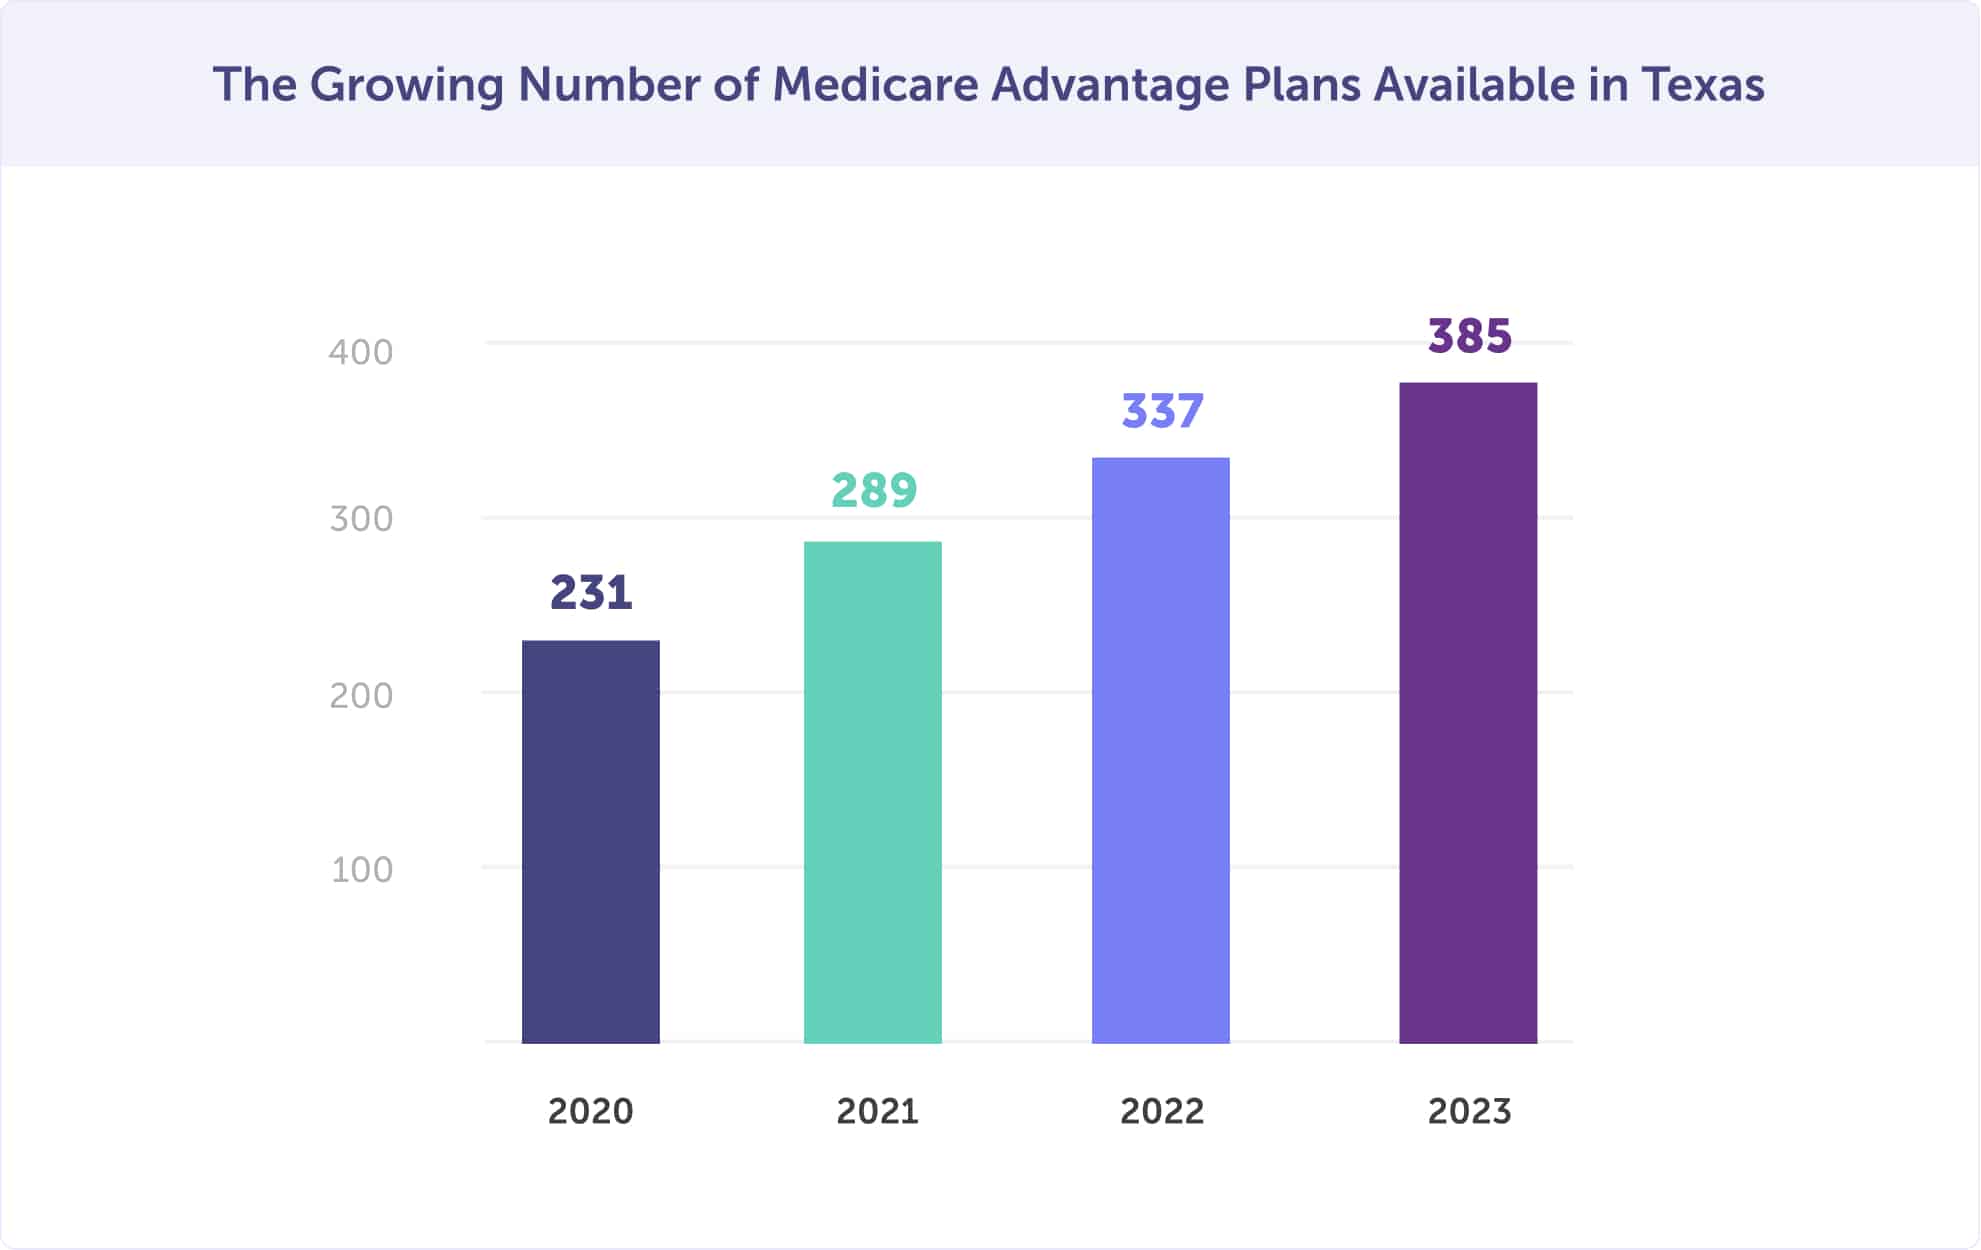 Increasing number of Medicare Advantage plans available in Texas